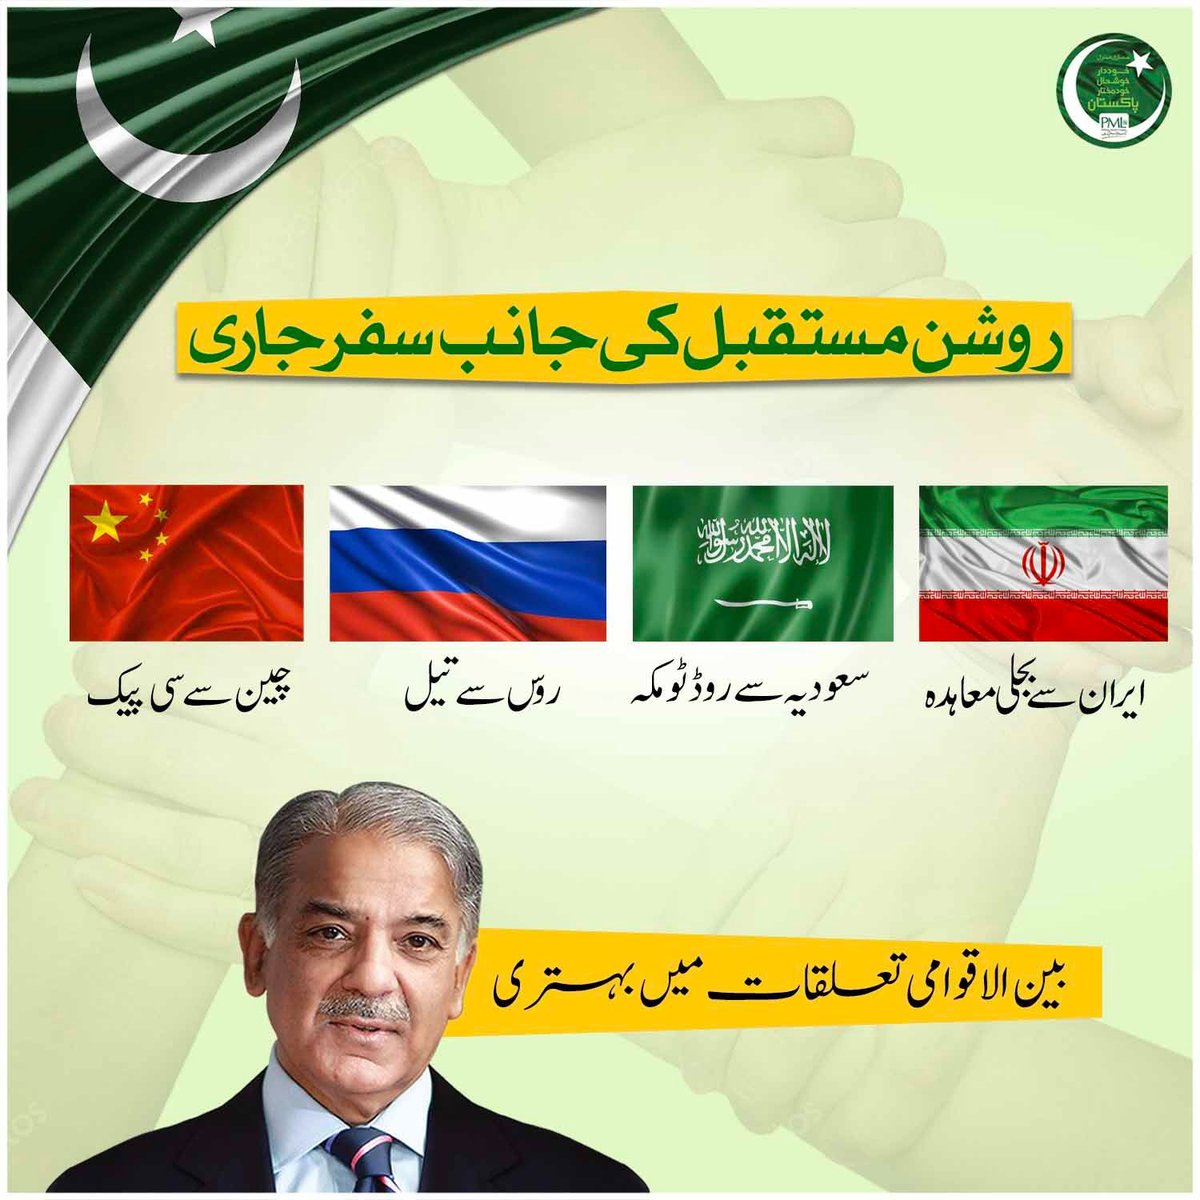 A man of his words, A man of pride, A man of positivity 💗
PM Shehbaz Sharif #RisingWithShehbazSpeed